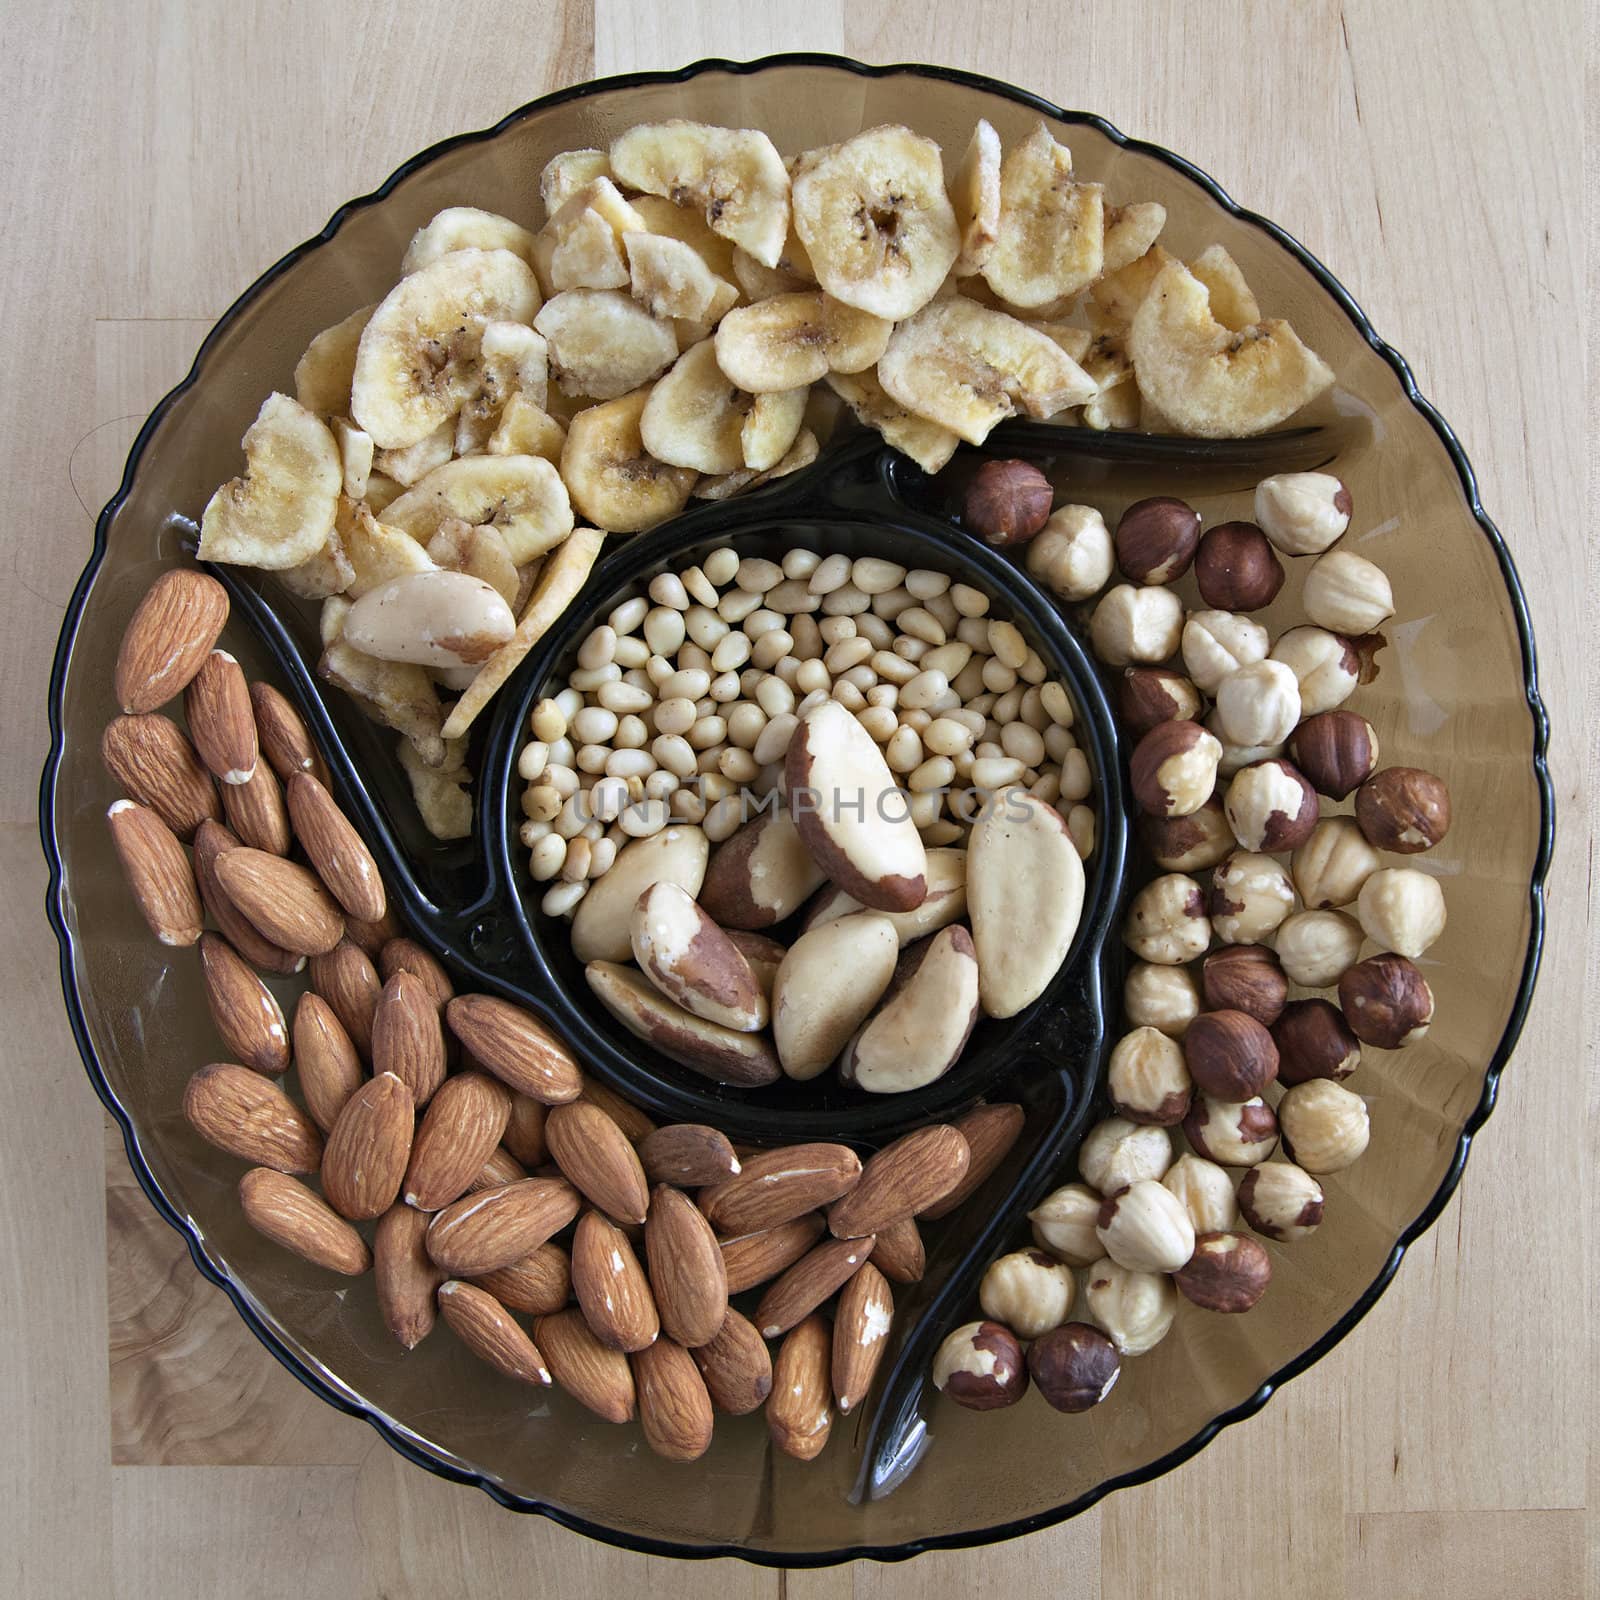 Nuts plate by Goodday